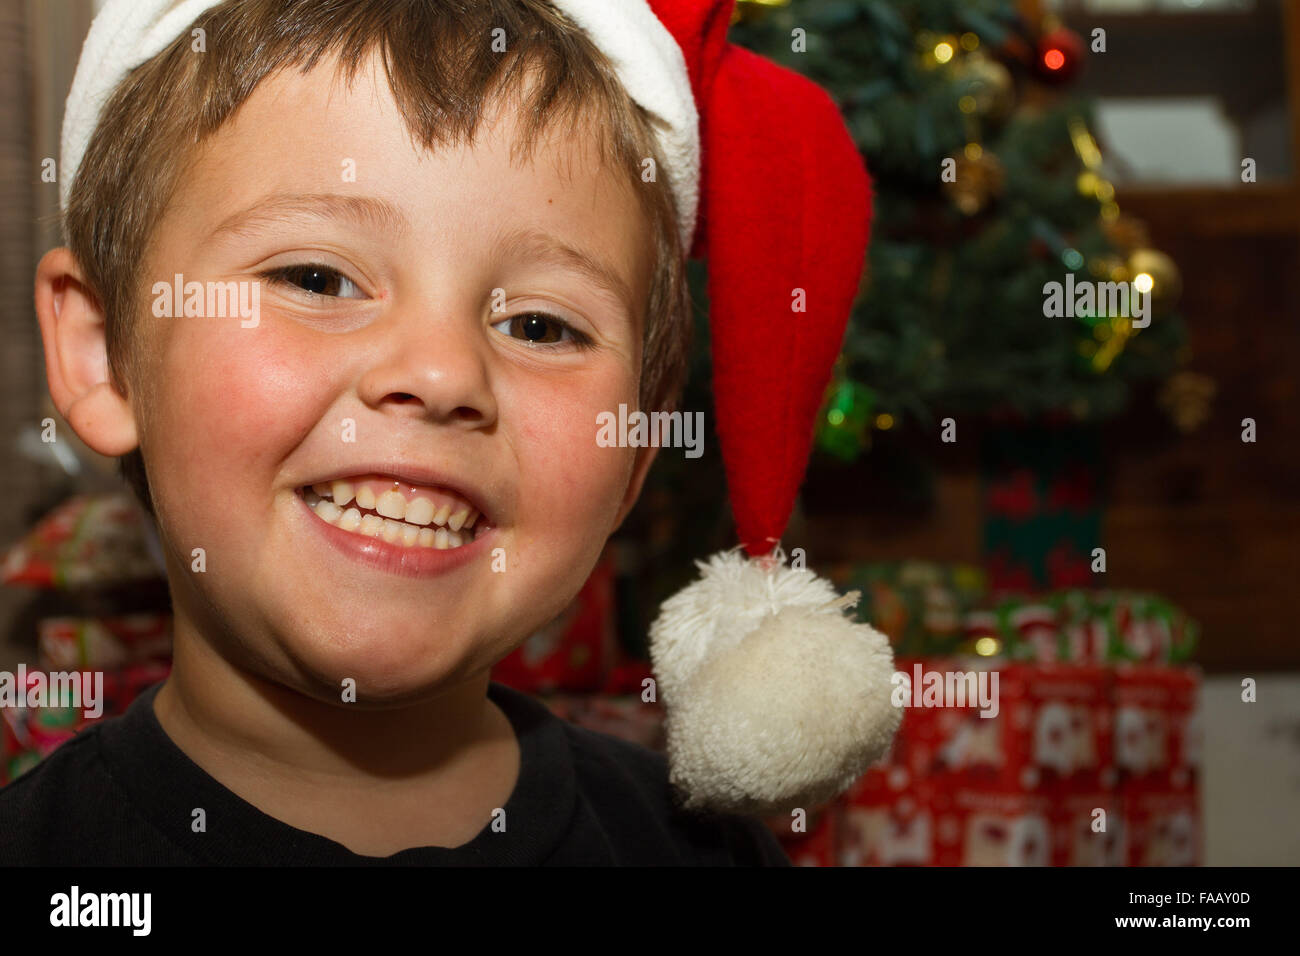 Happy boy in front of Christmas tree with Santa hat. Stock Photo